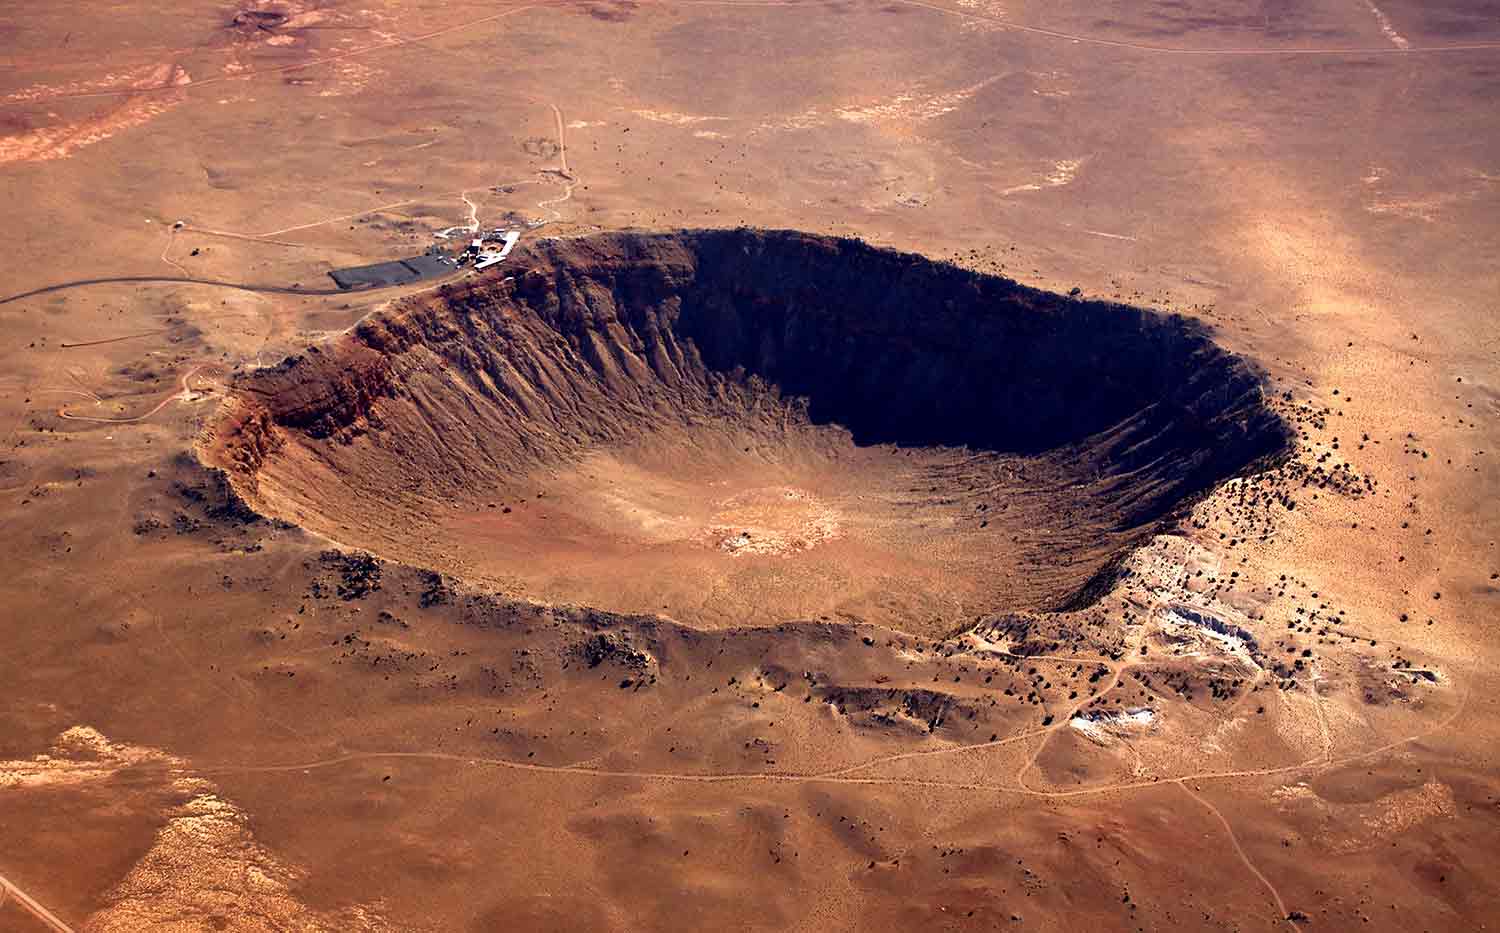 A crater in a brown surface.